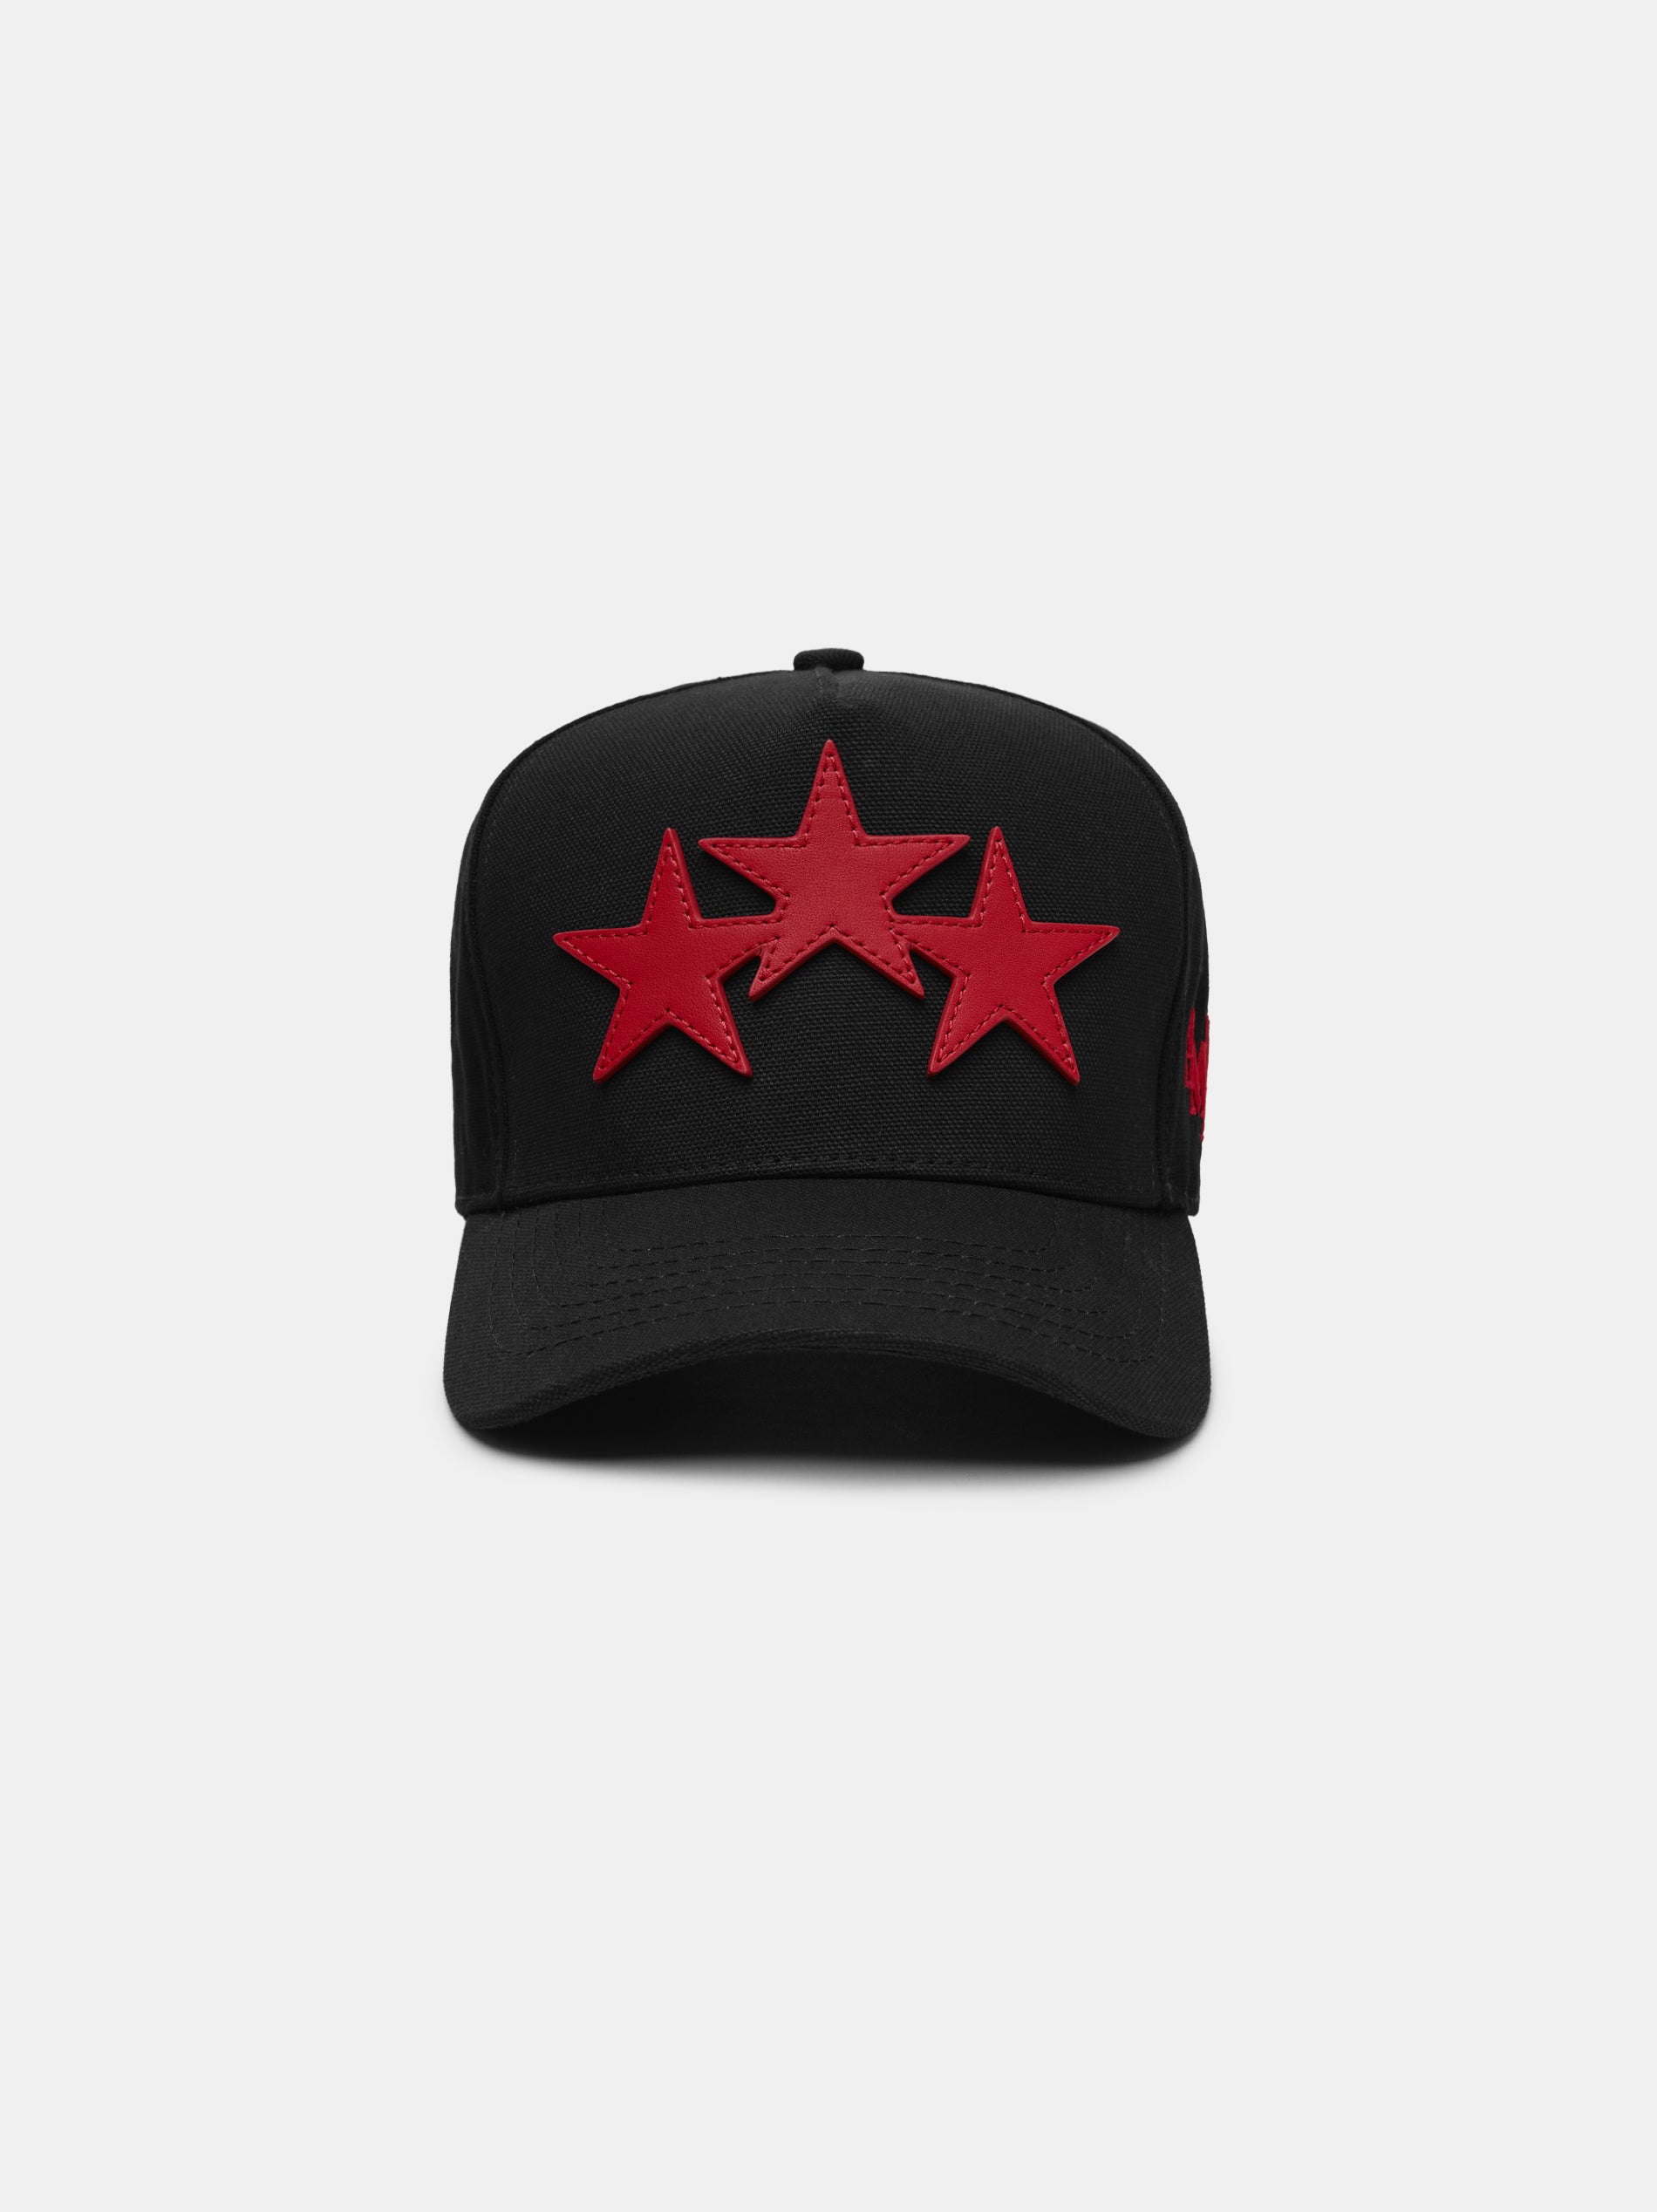 Product THREE STAR STAGGERED AMIRI FULL CANVAS HAT - Black Red featured image